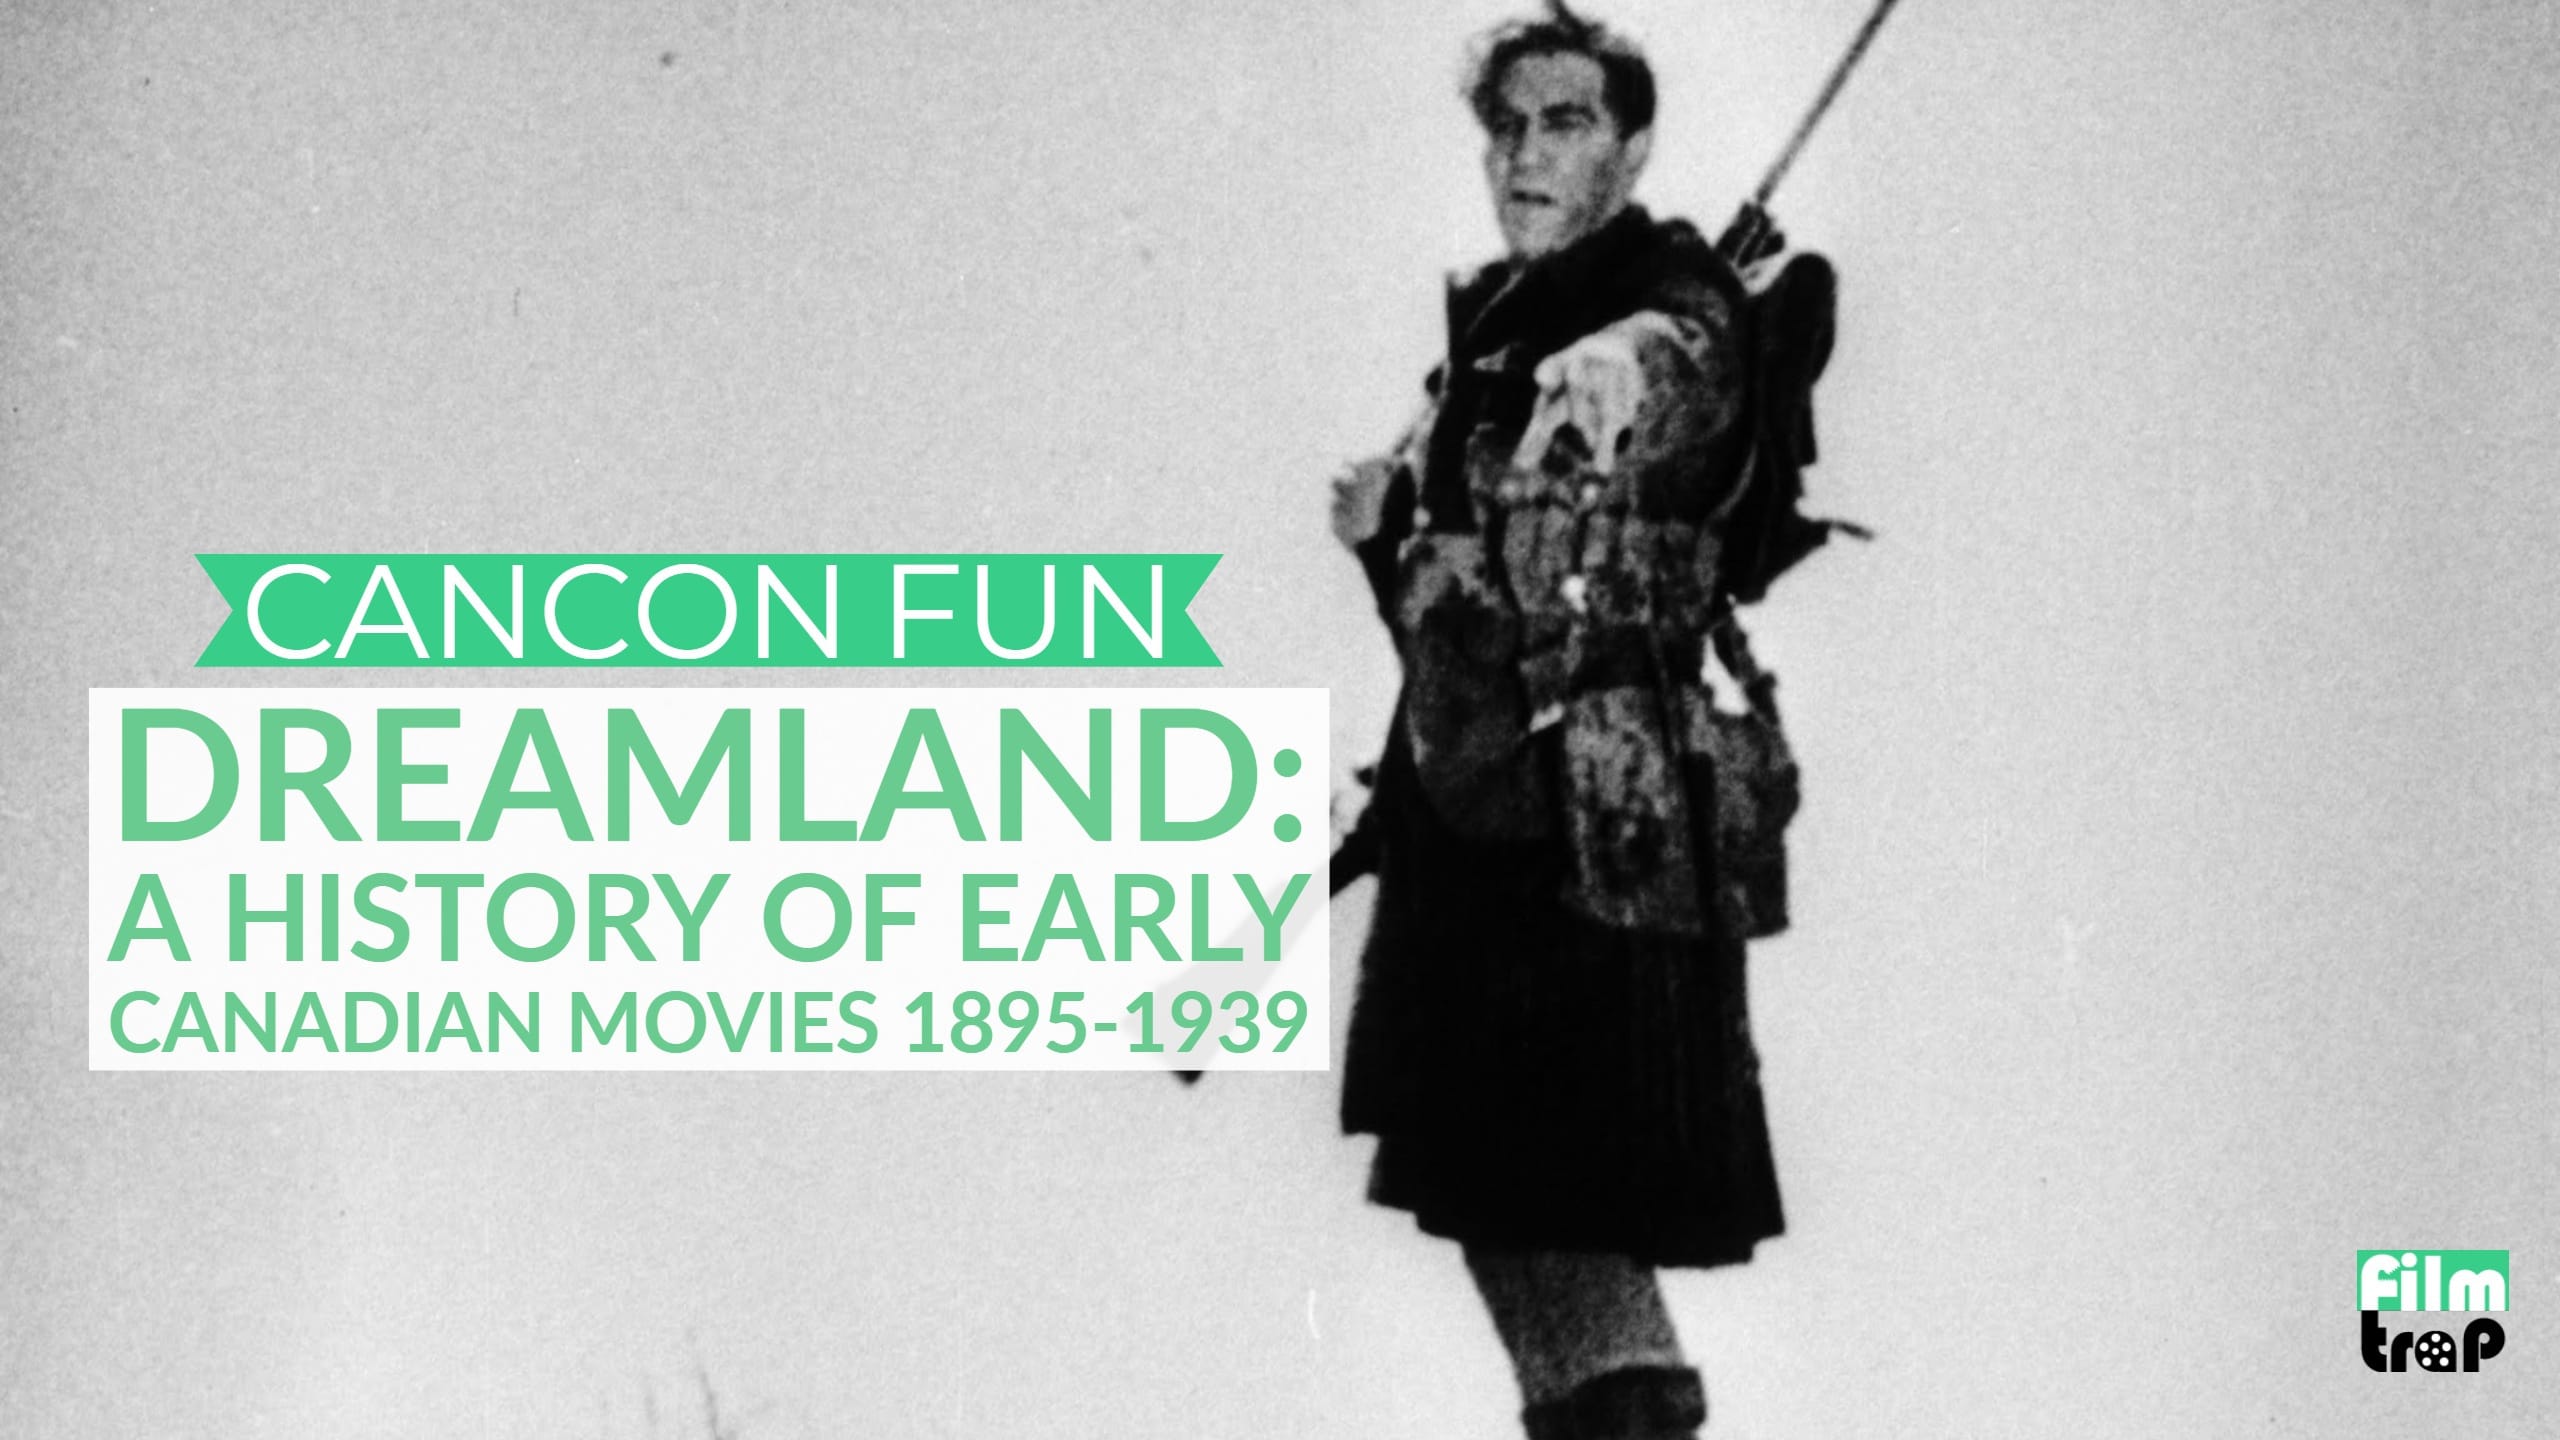 Cancon Fun: Dreamland – A History of Early Canadian Movies 1895-1939 (1974)